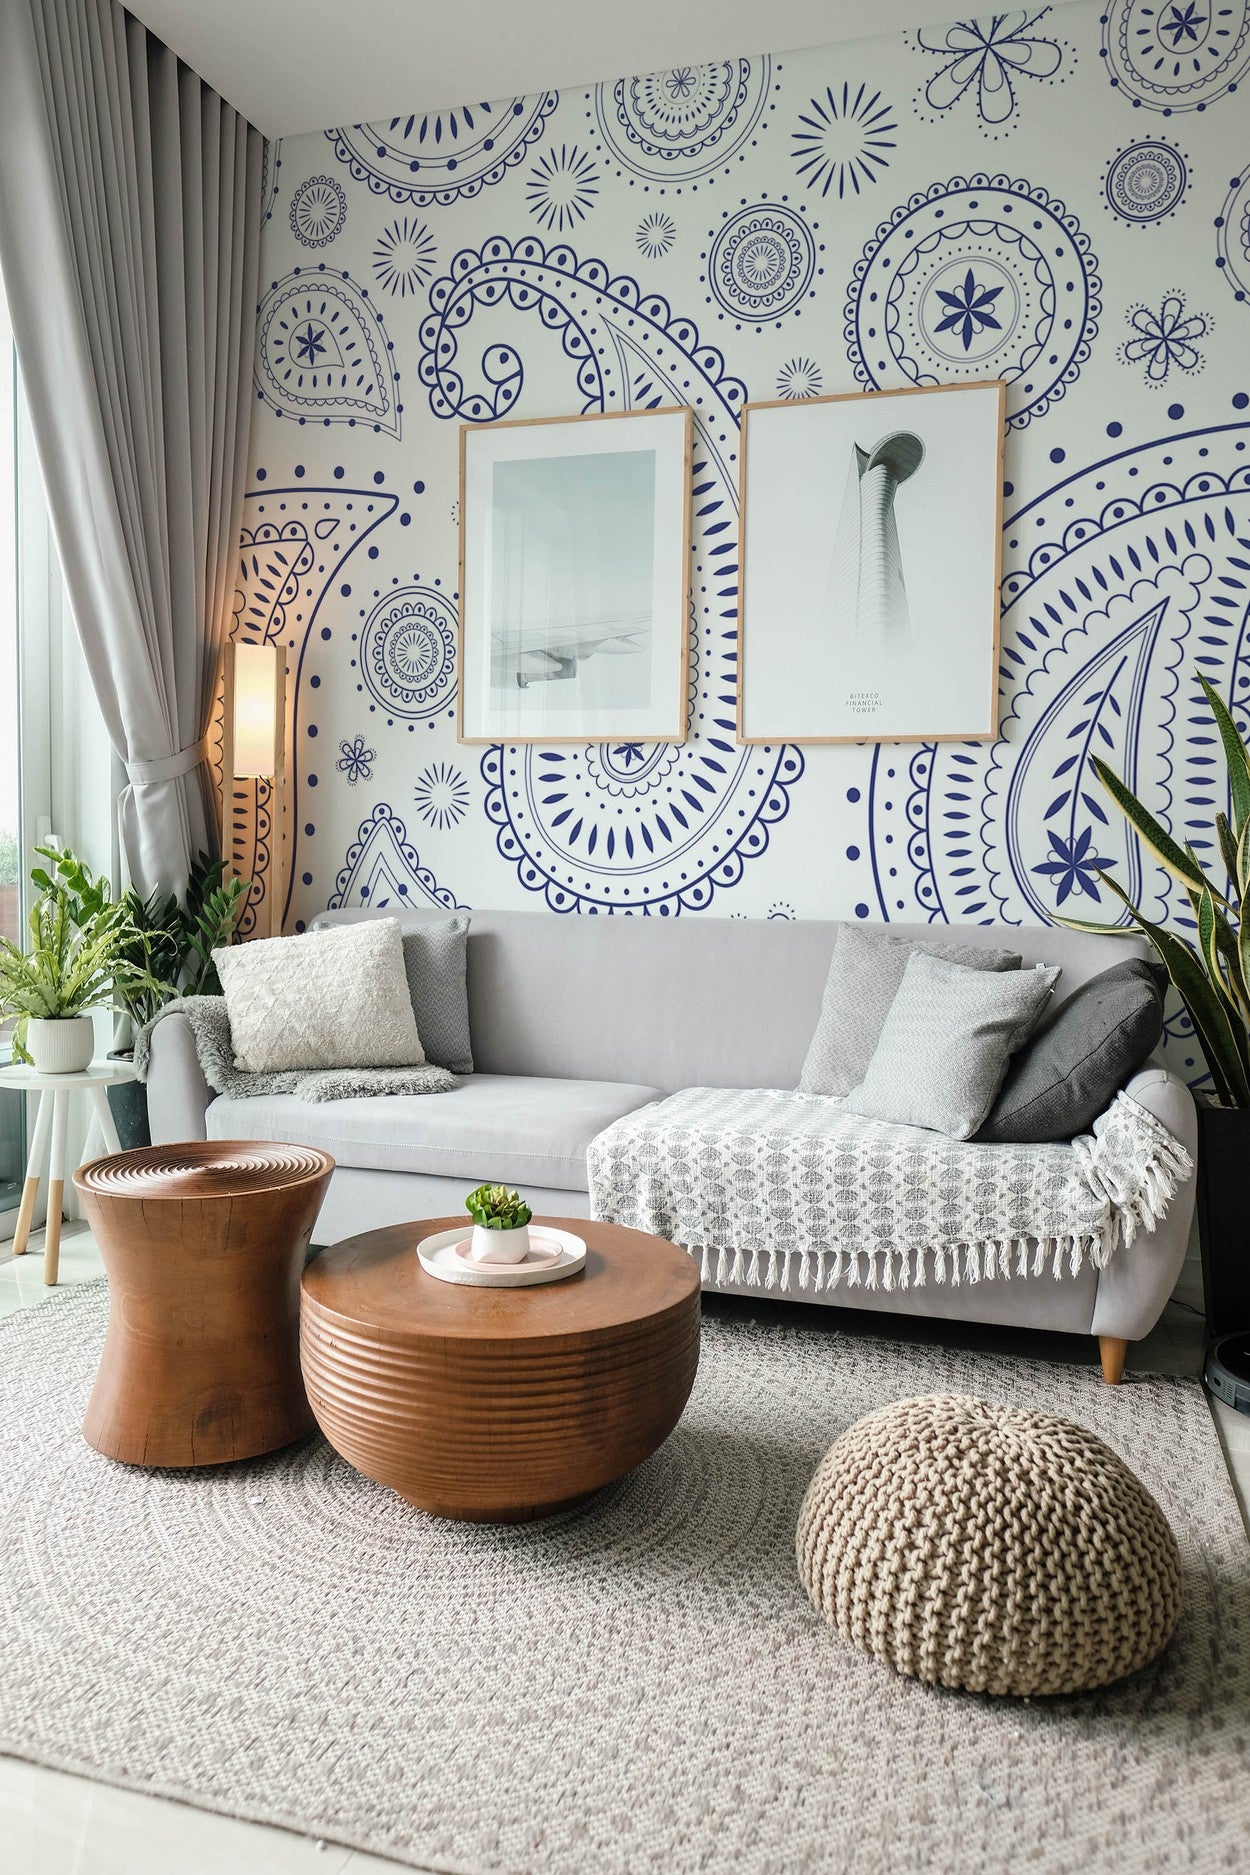 Contemporary living room interior with sofa, wooden furniture, and decorative blue and white wall mural